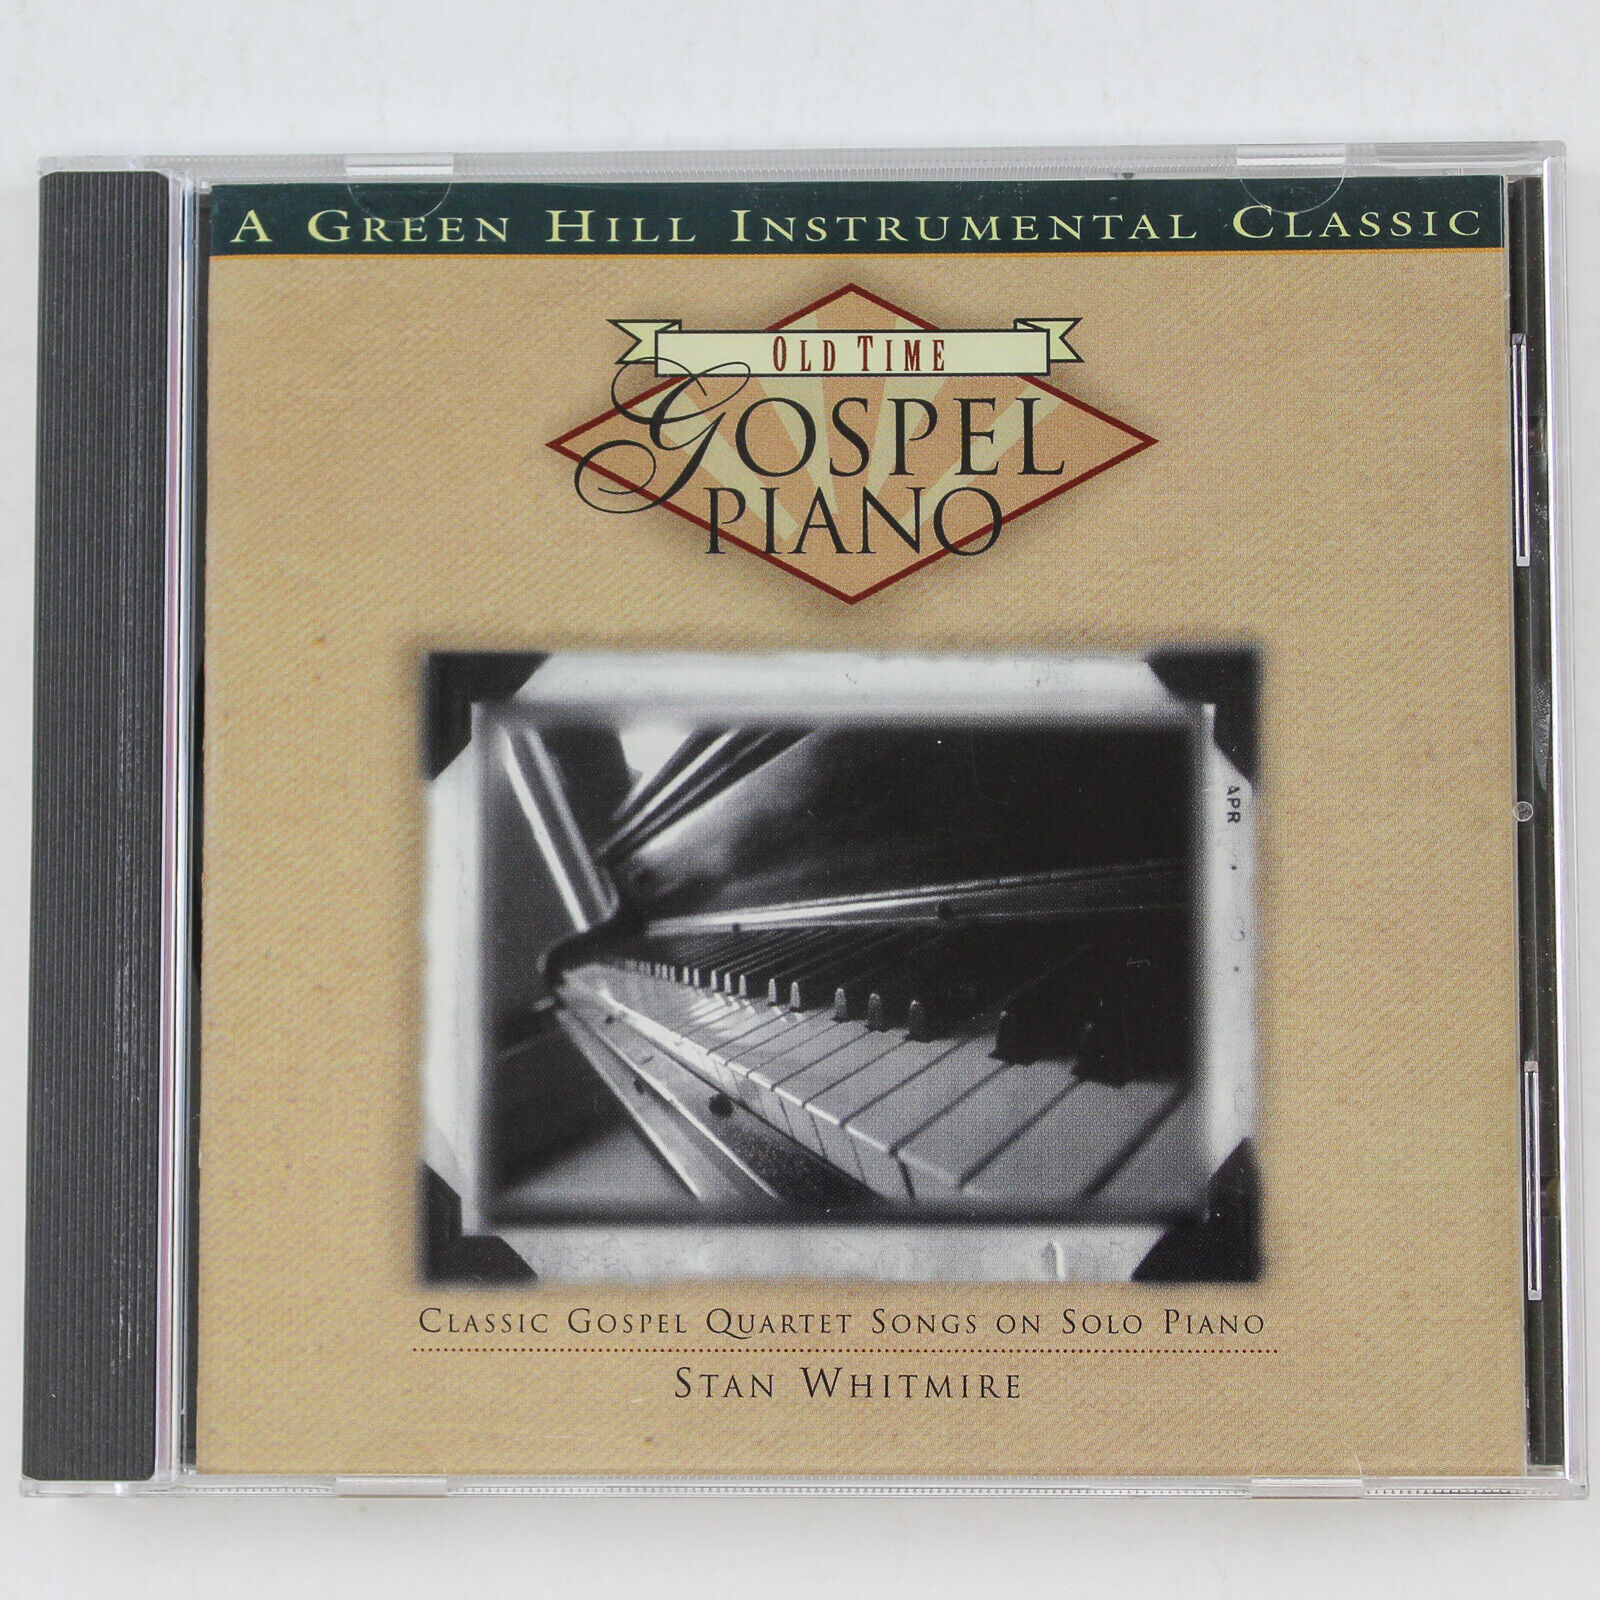 Old Time Gospel Piano A Green Hill Instrumental Classic Audio Music CD 1996